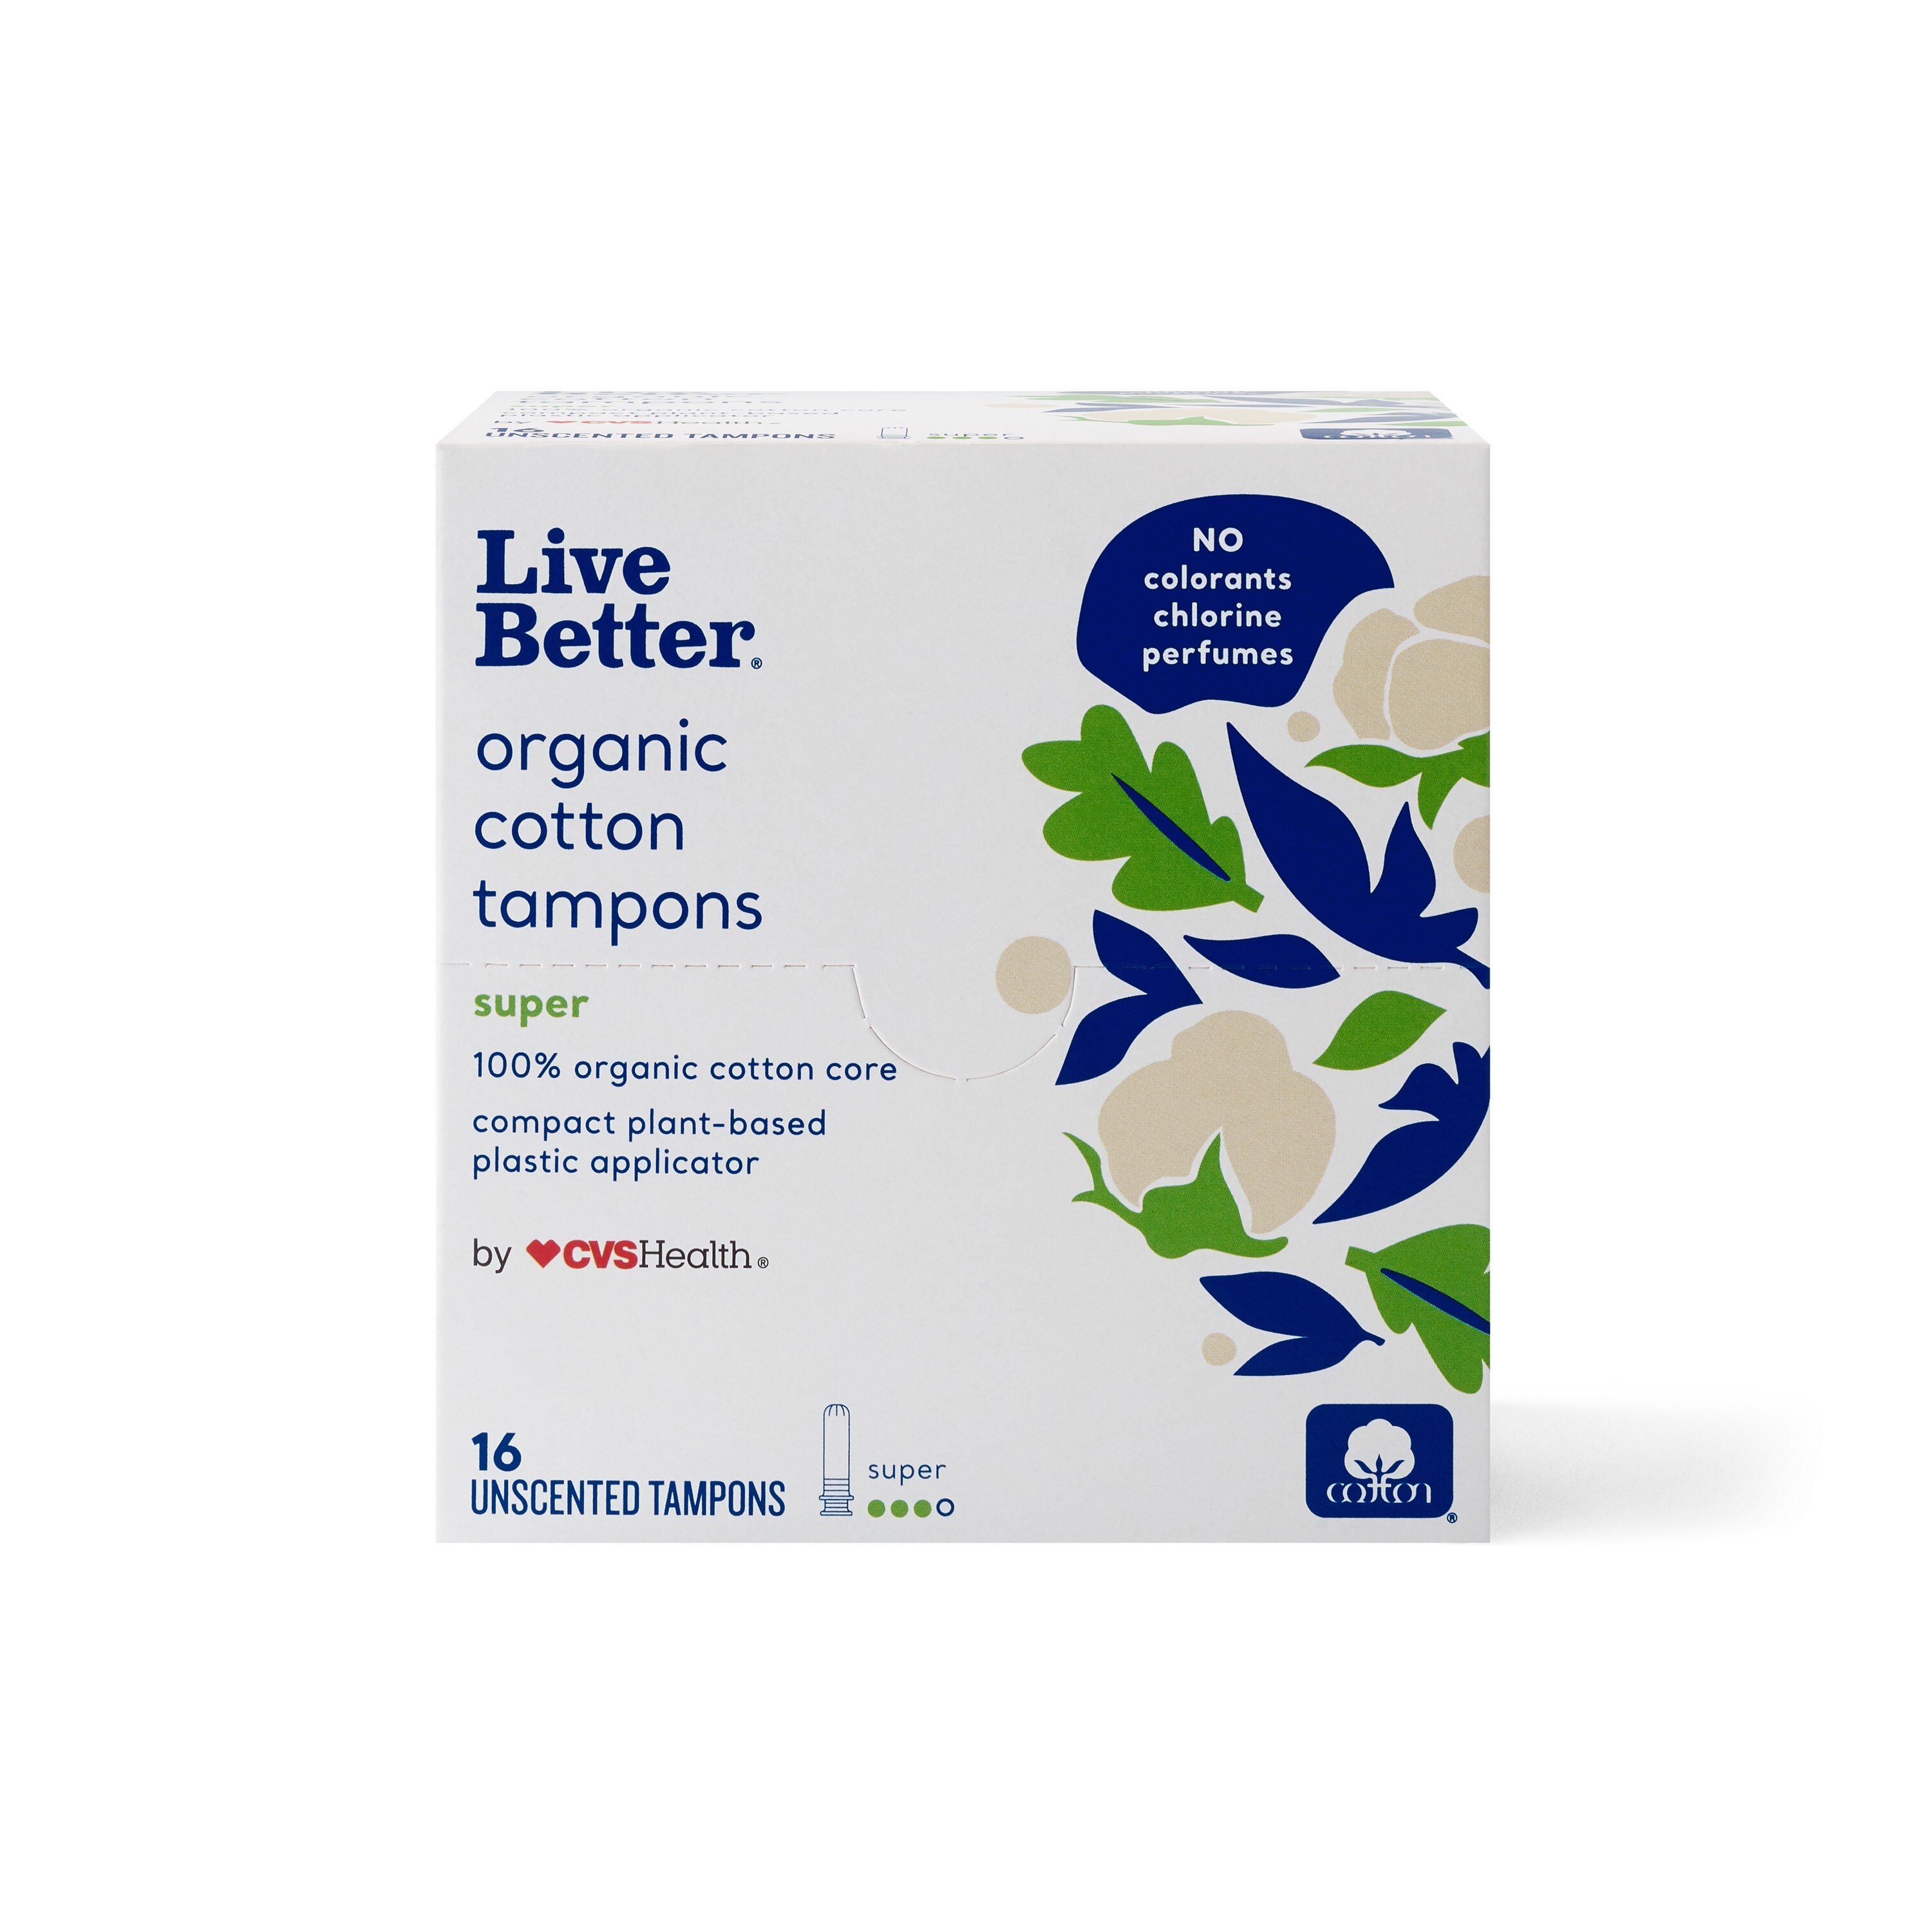 CVS Live Better Organic Cotton Tampons with Compact Plant-Based Plastic Applicator, Super, 16 CT